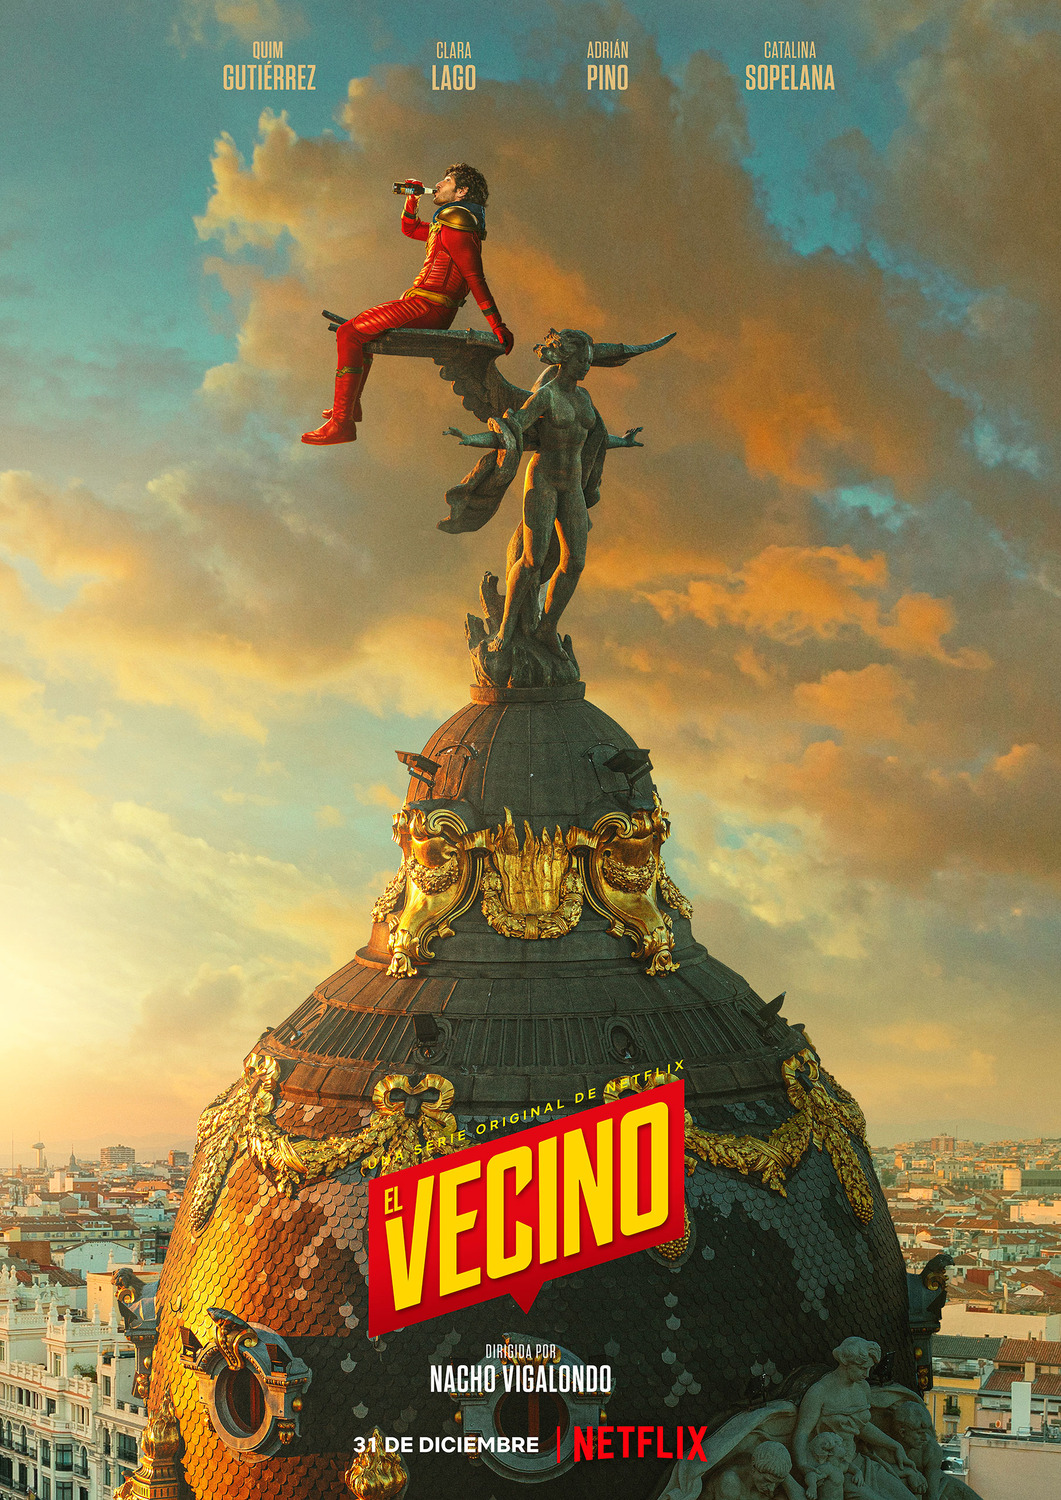 Extra Large TV Poster Image for El vecino (#4 of 9)